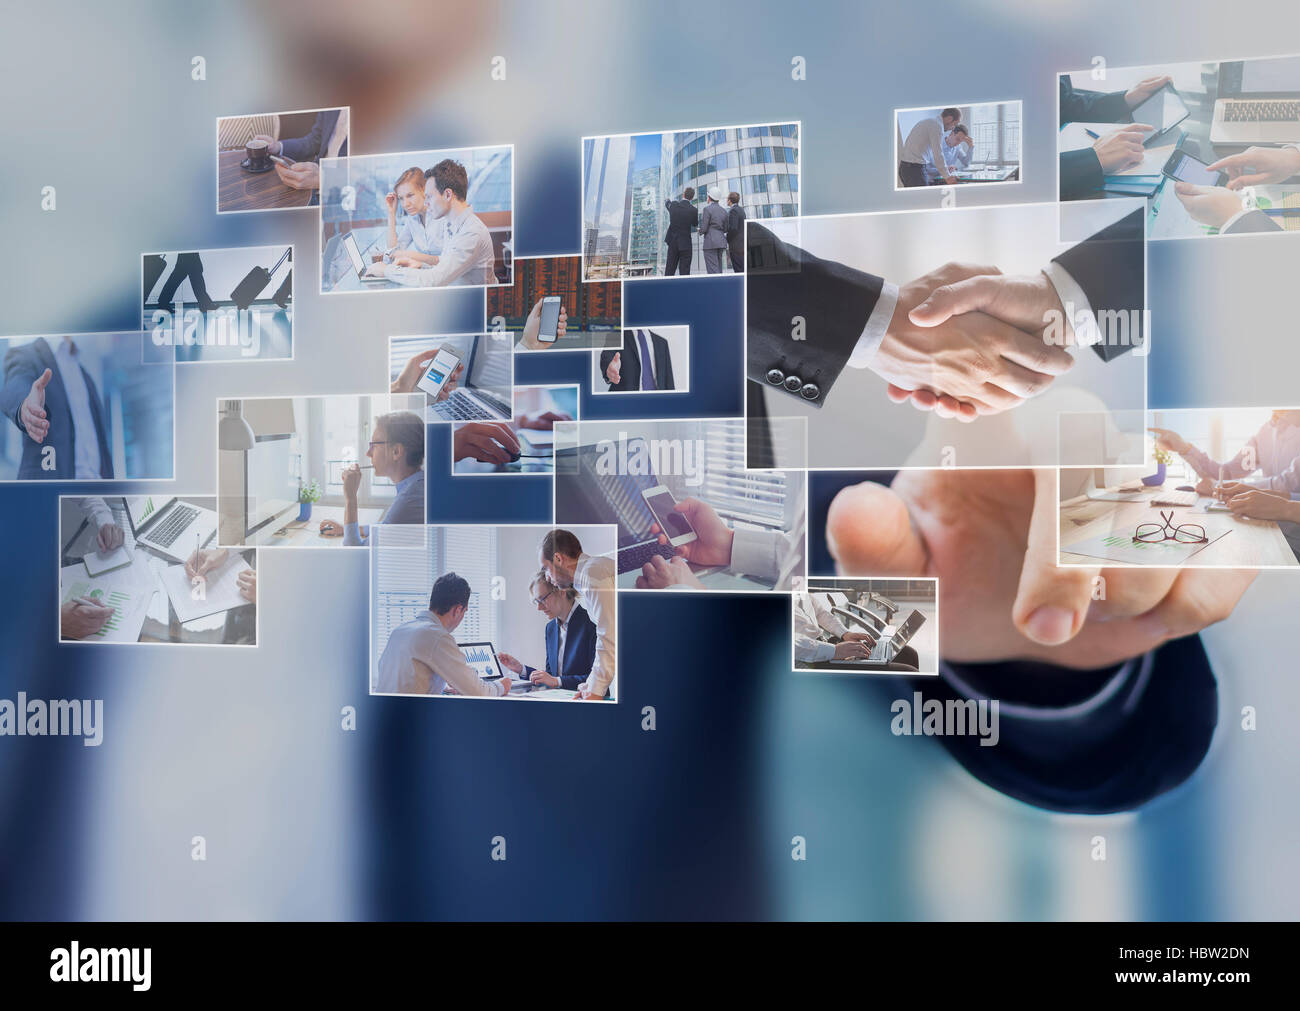 Businessman touching a photo on a digital screen interface, abstract images of business situations Stock Photo